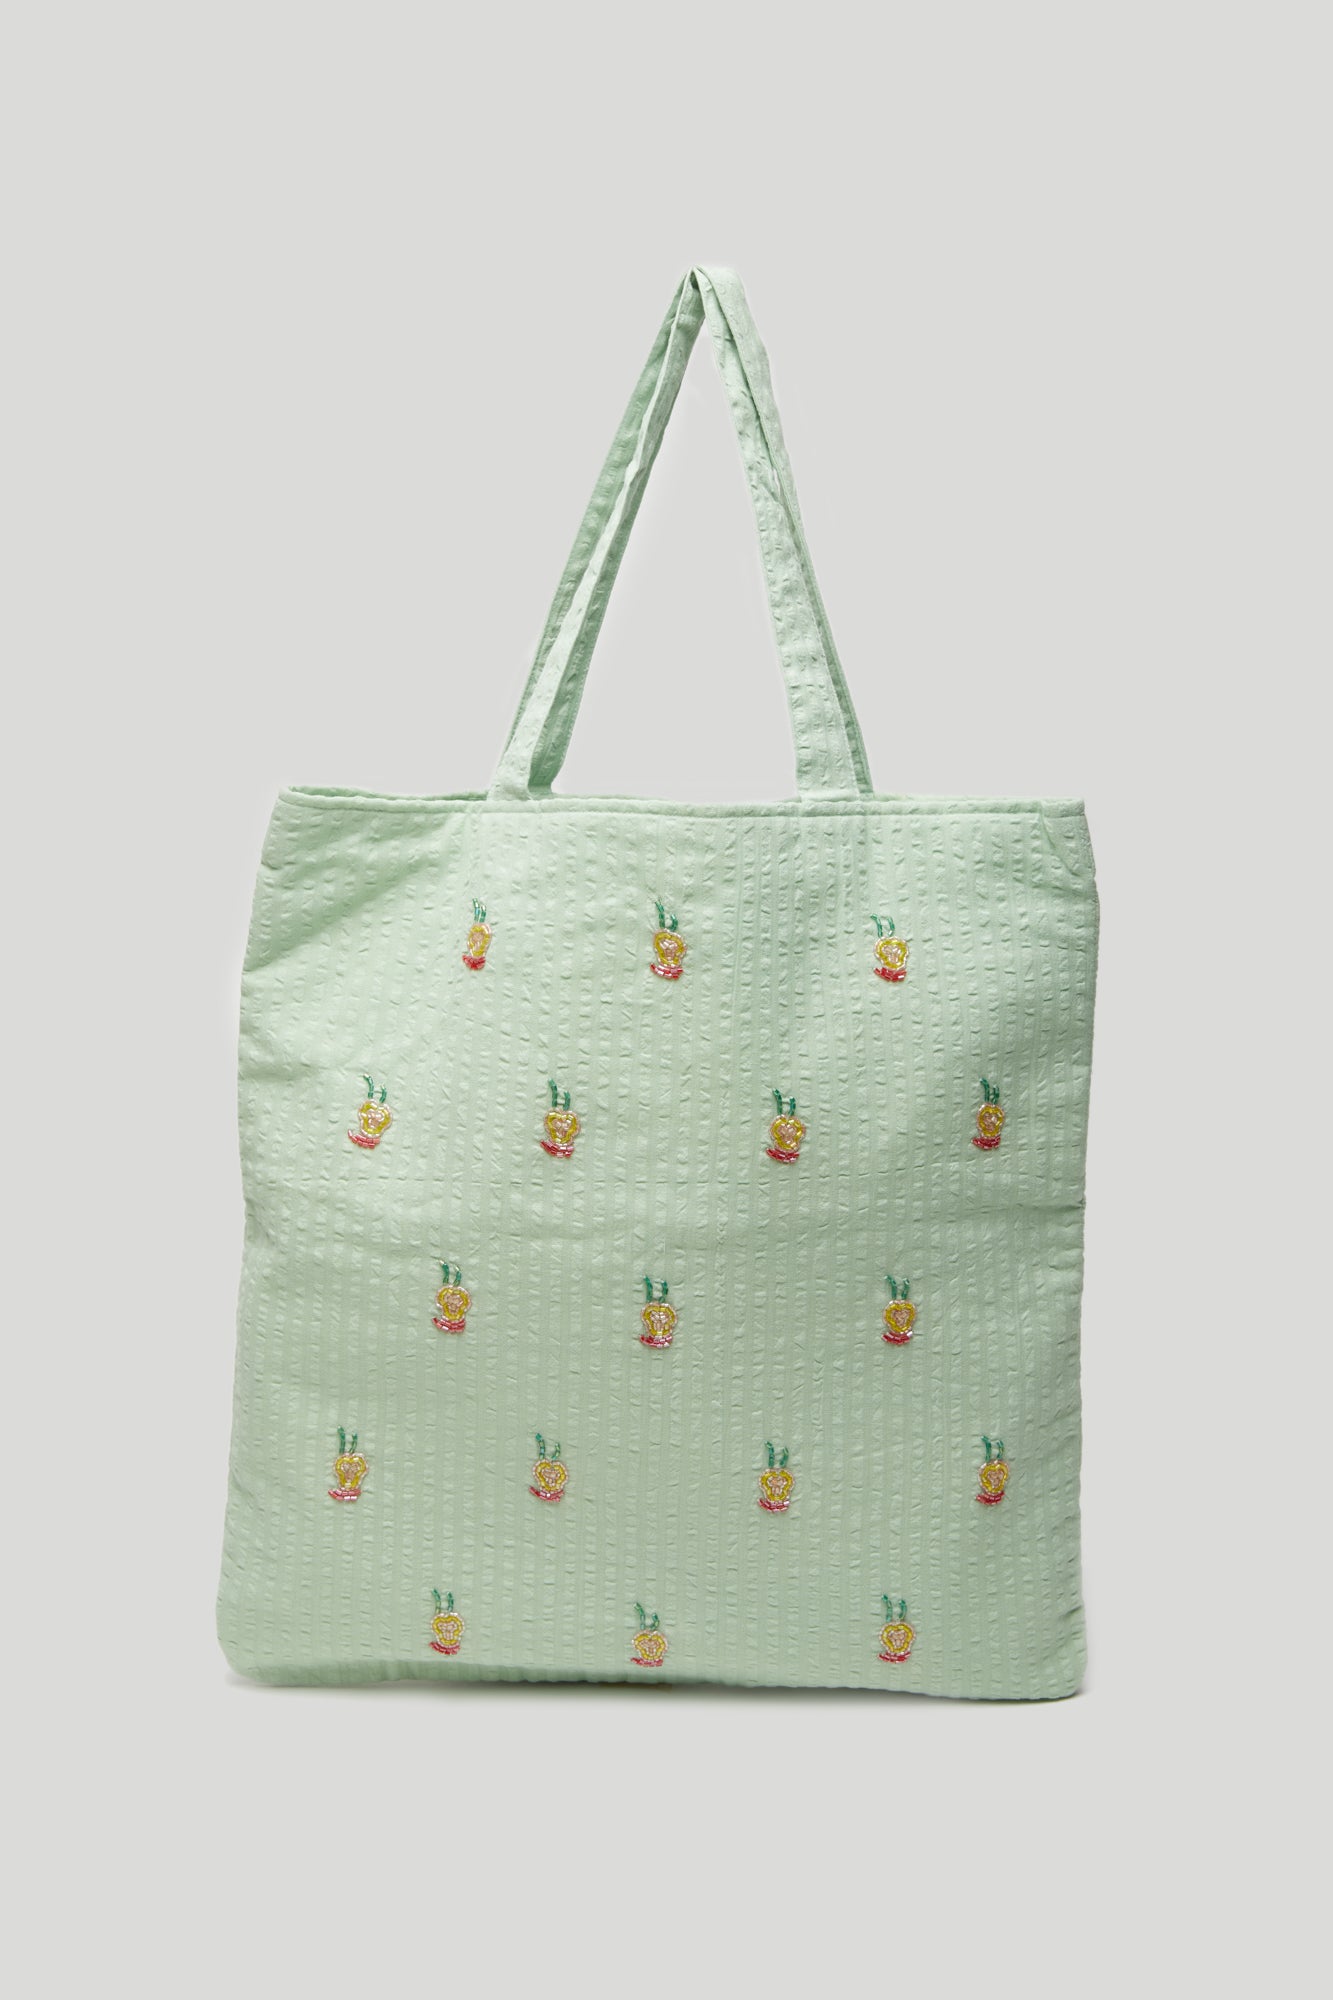 HVISK Mint Green Dale Tote Bag with Embroidery